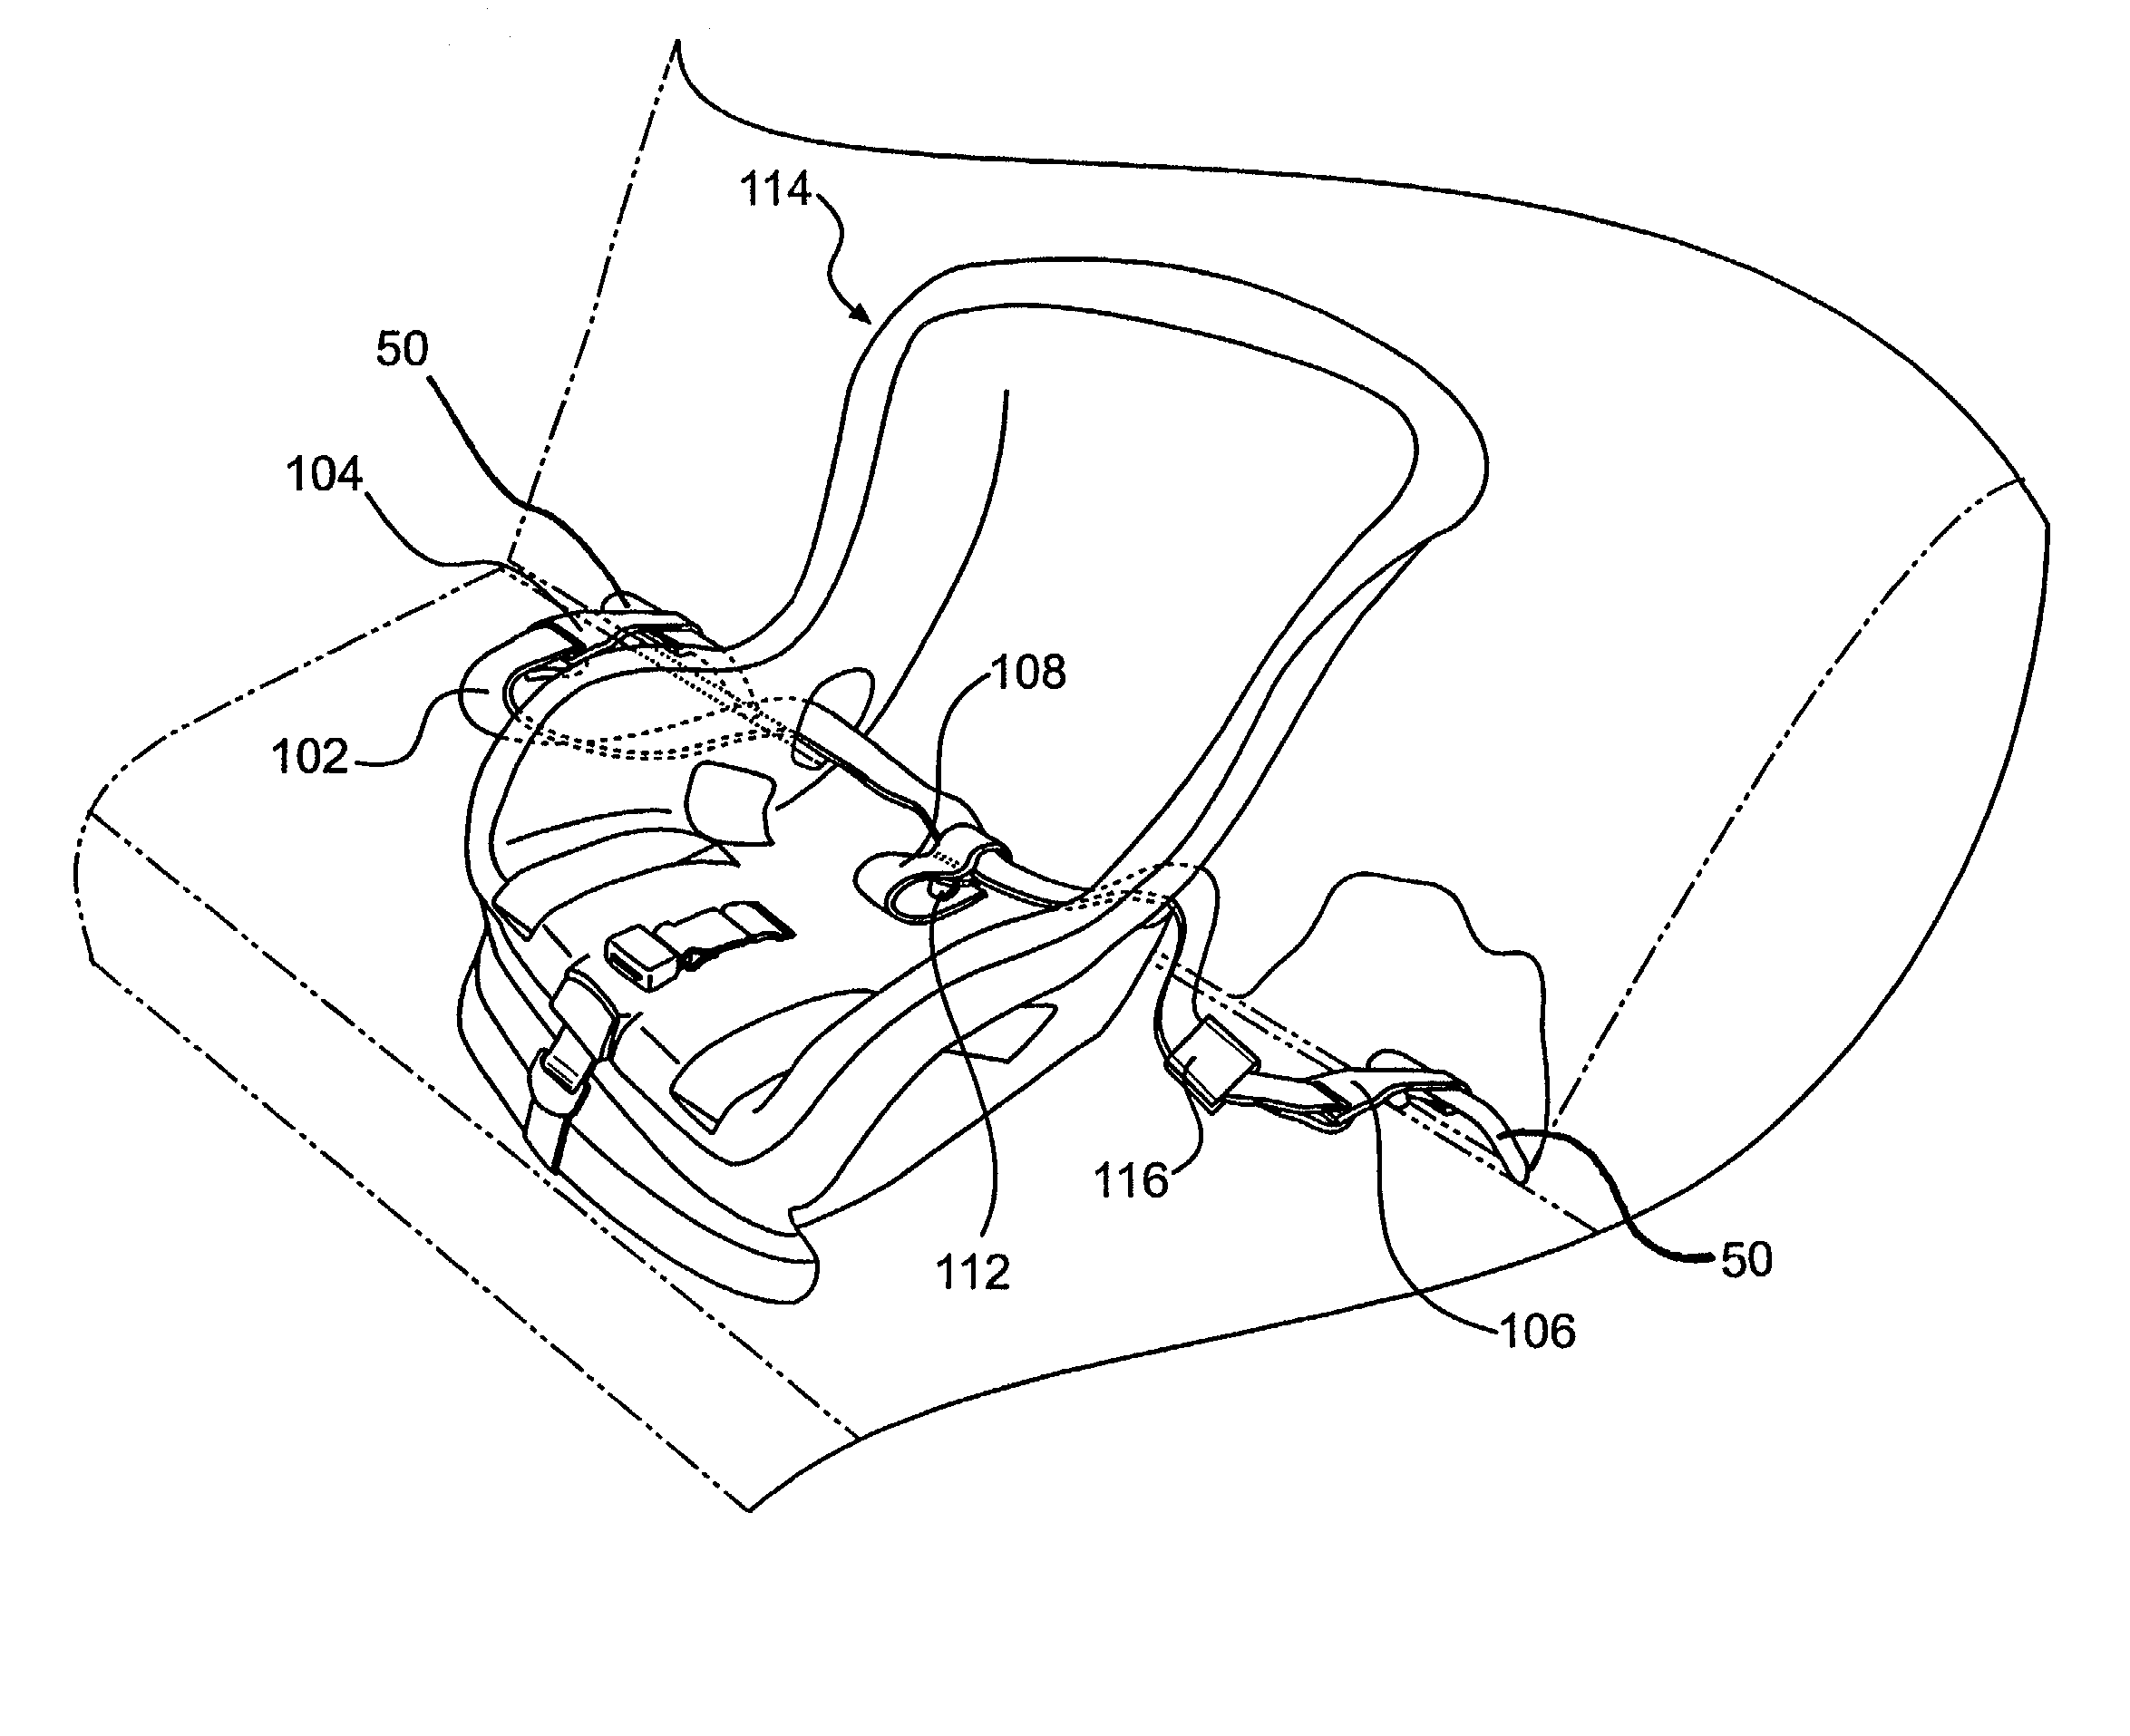 Child vehicle seat having permanently attached latch system